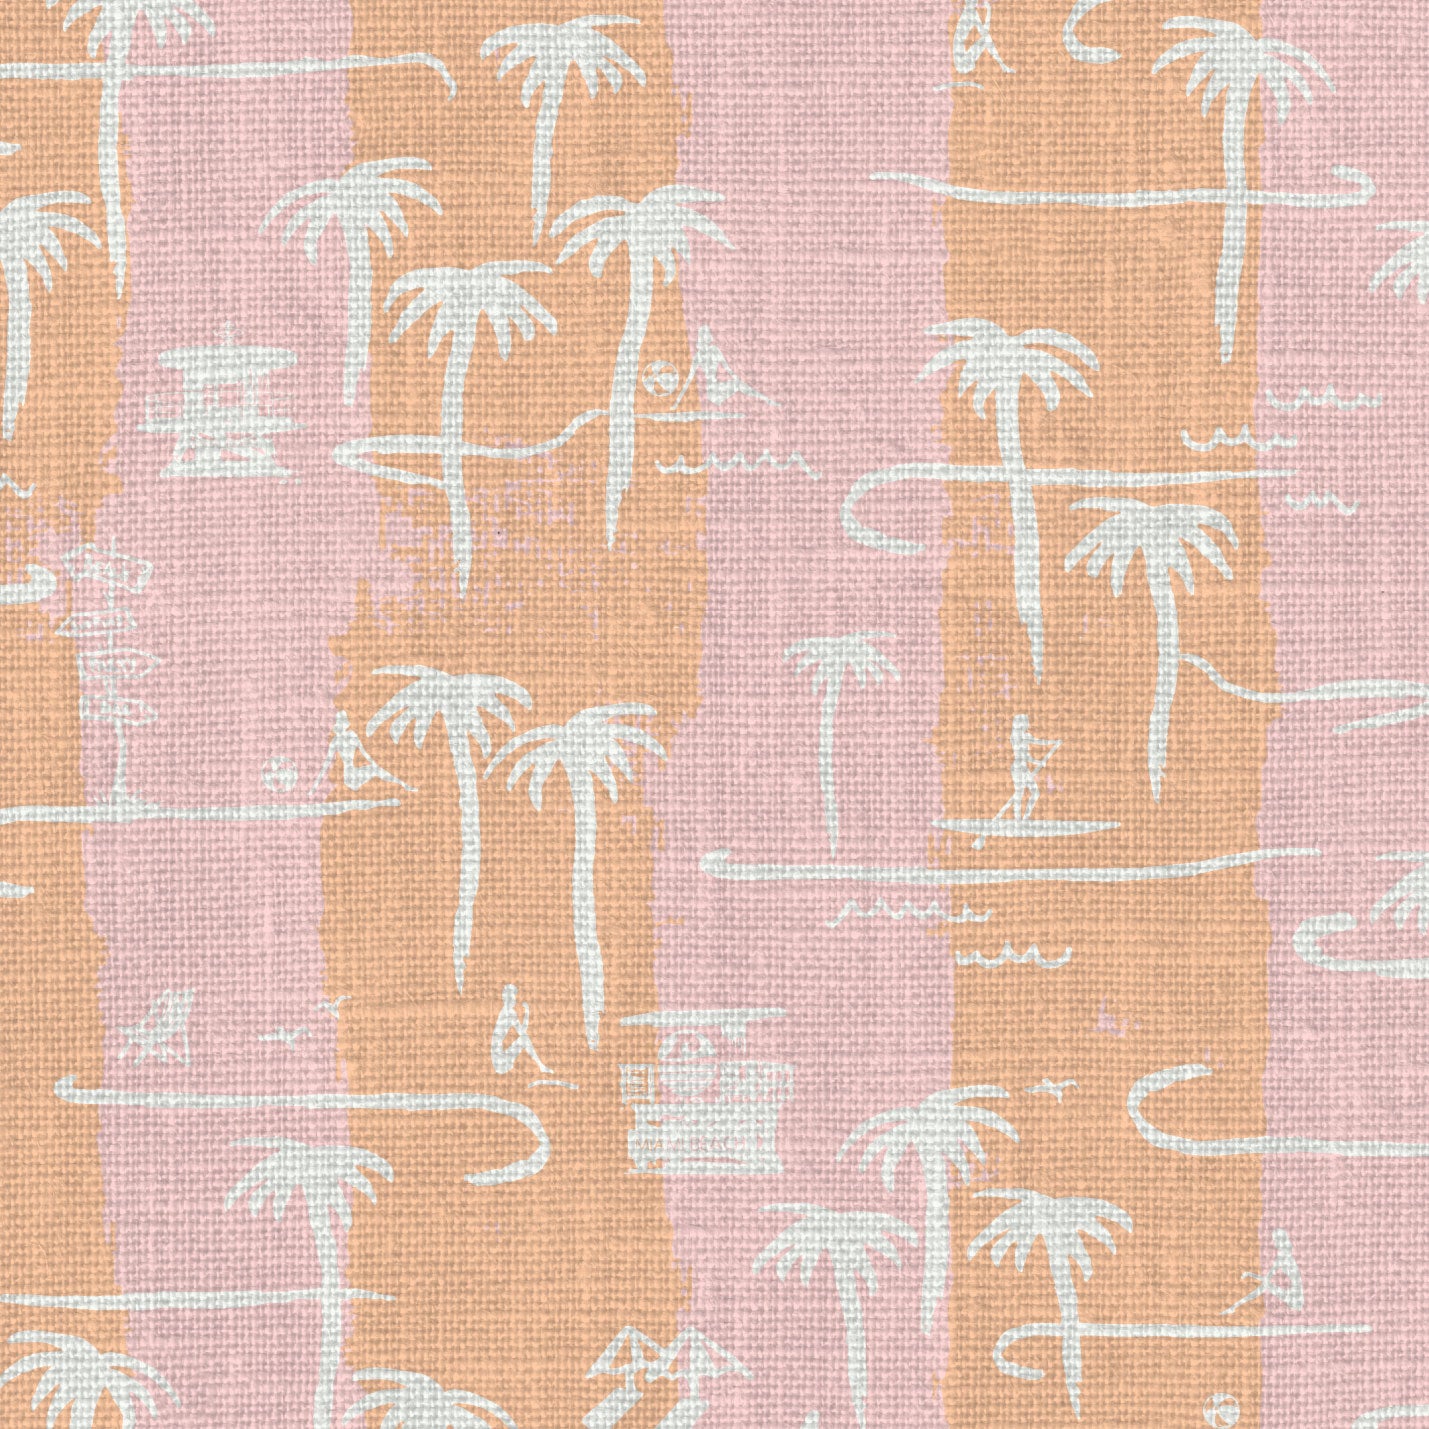 two color vertical stripe beach print featuring palm trees, beachgoers, lifeguard stands and ocean waves linen Natural Textured Eco-Friendly Non-toxic High-quality Sustainable practices Sustainability Interior Design Wall covering Bold Wallpaper Custom Tailor-made Retro chic Tropical Seaside Coastal Seashore Waterfront Vacation home styling Retreat Relaxed beach vibes Beach cottage Shoreline Oceanfront Nautical pink baby orange sunset tangerine corals